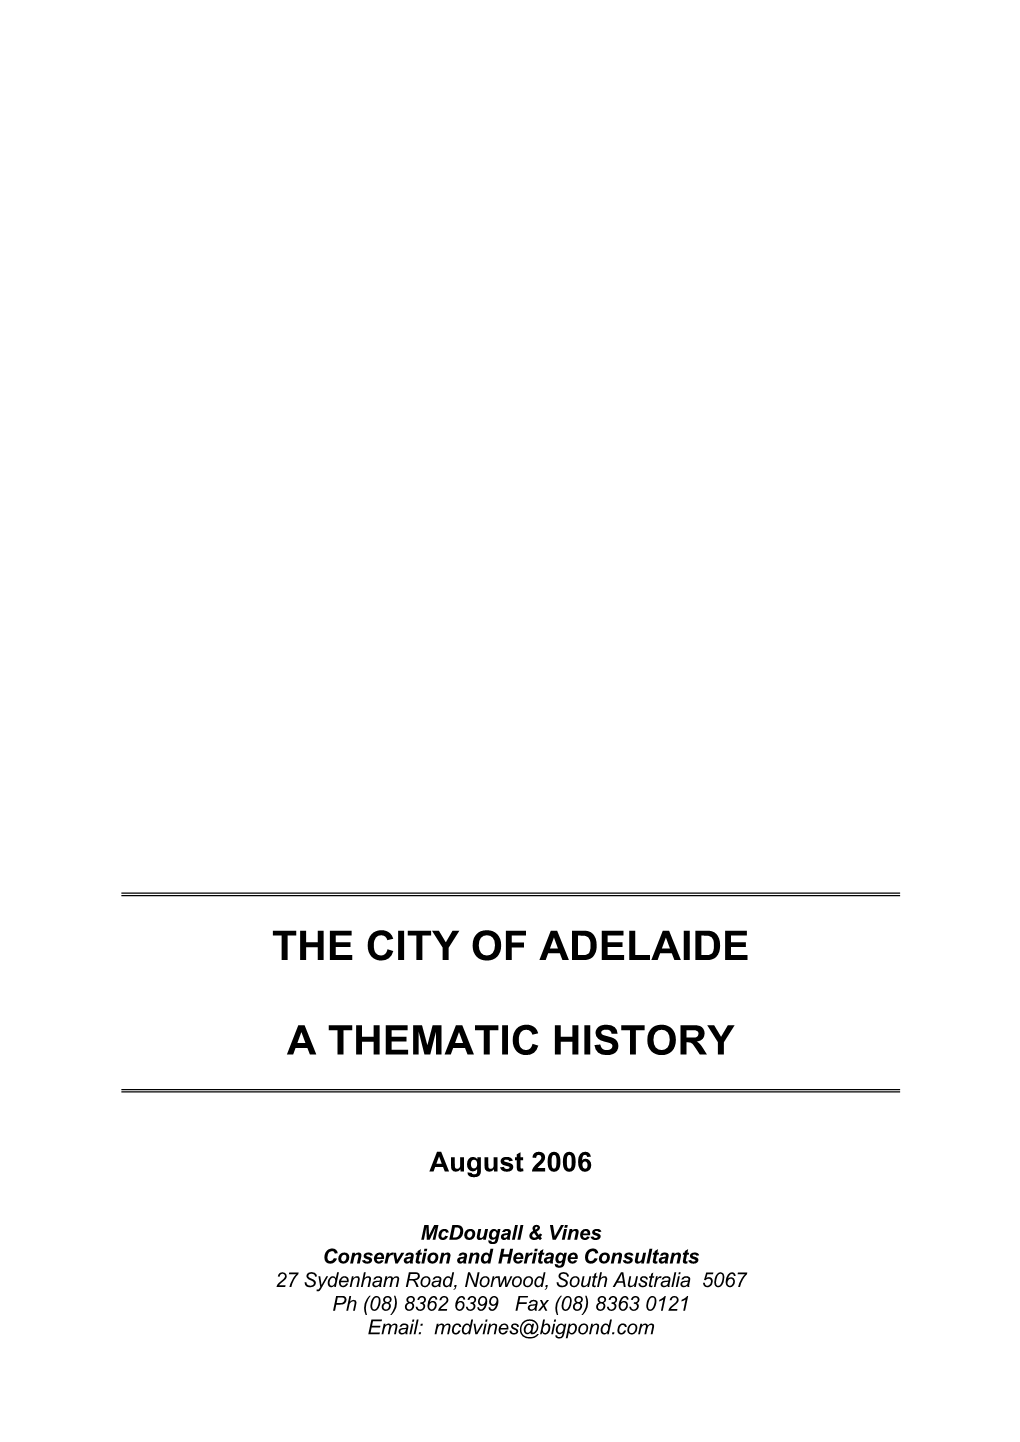 The City of Adelaide a Thematic History